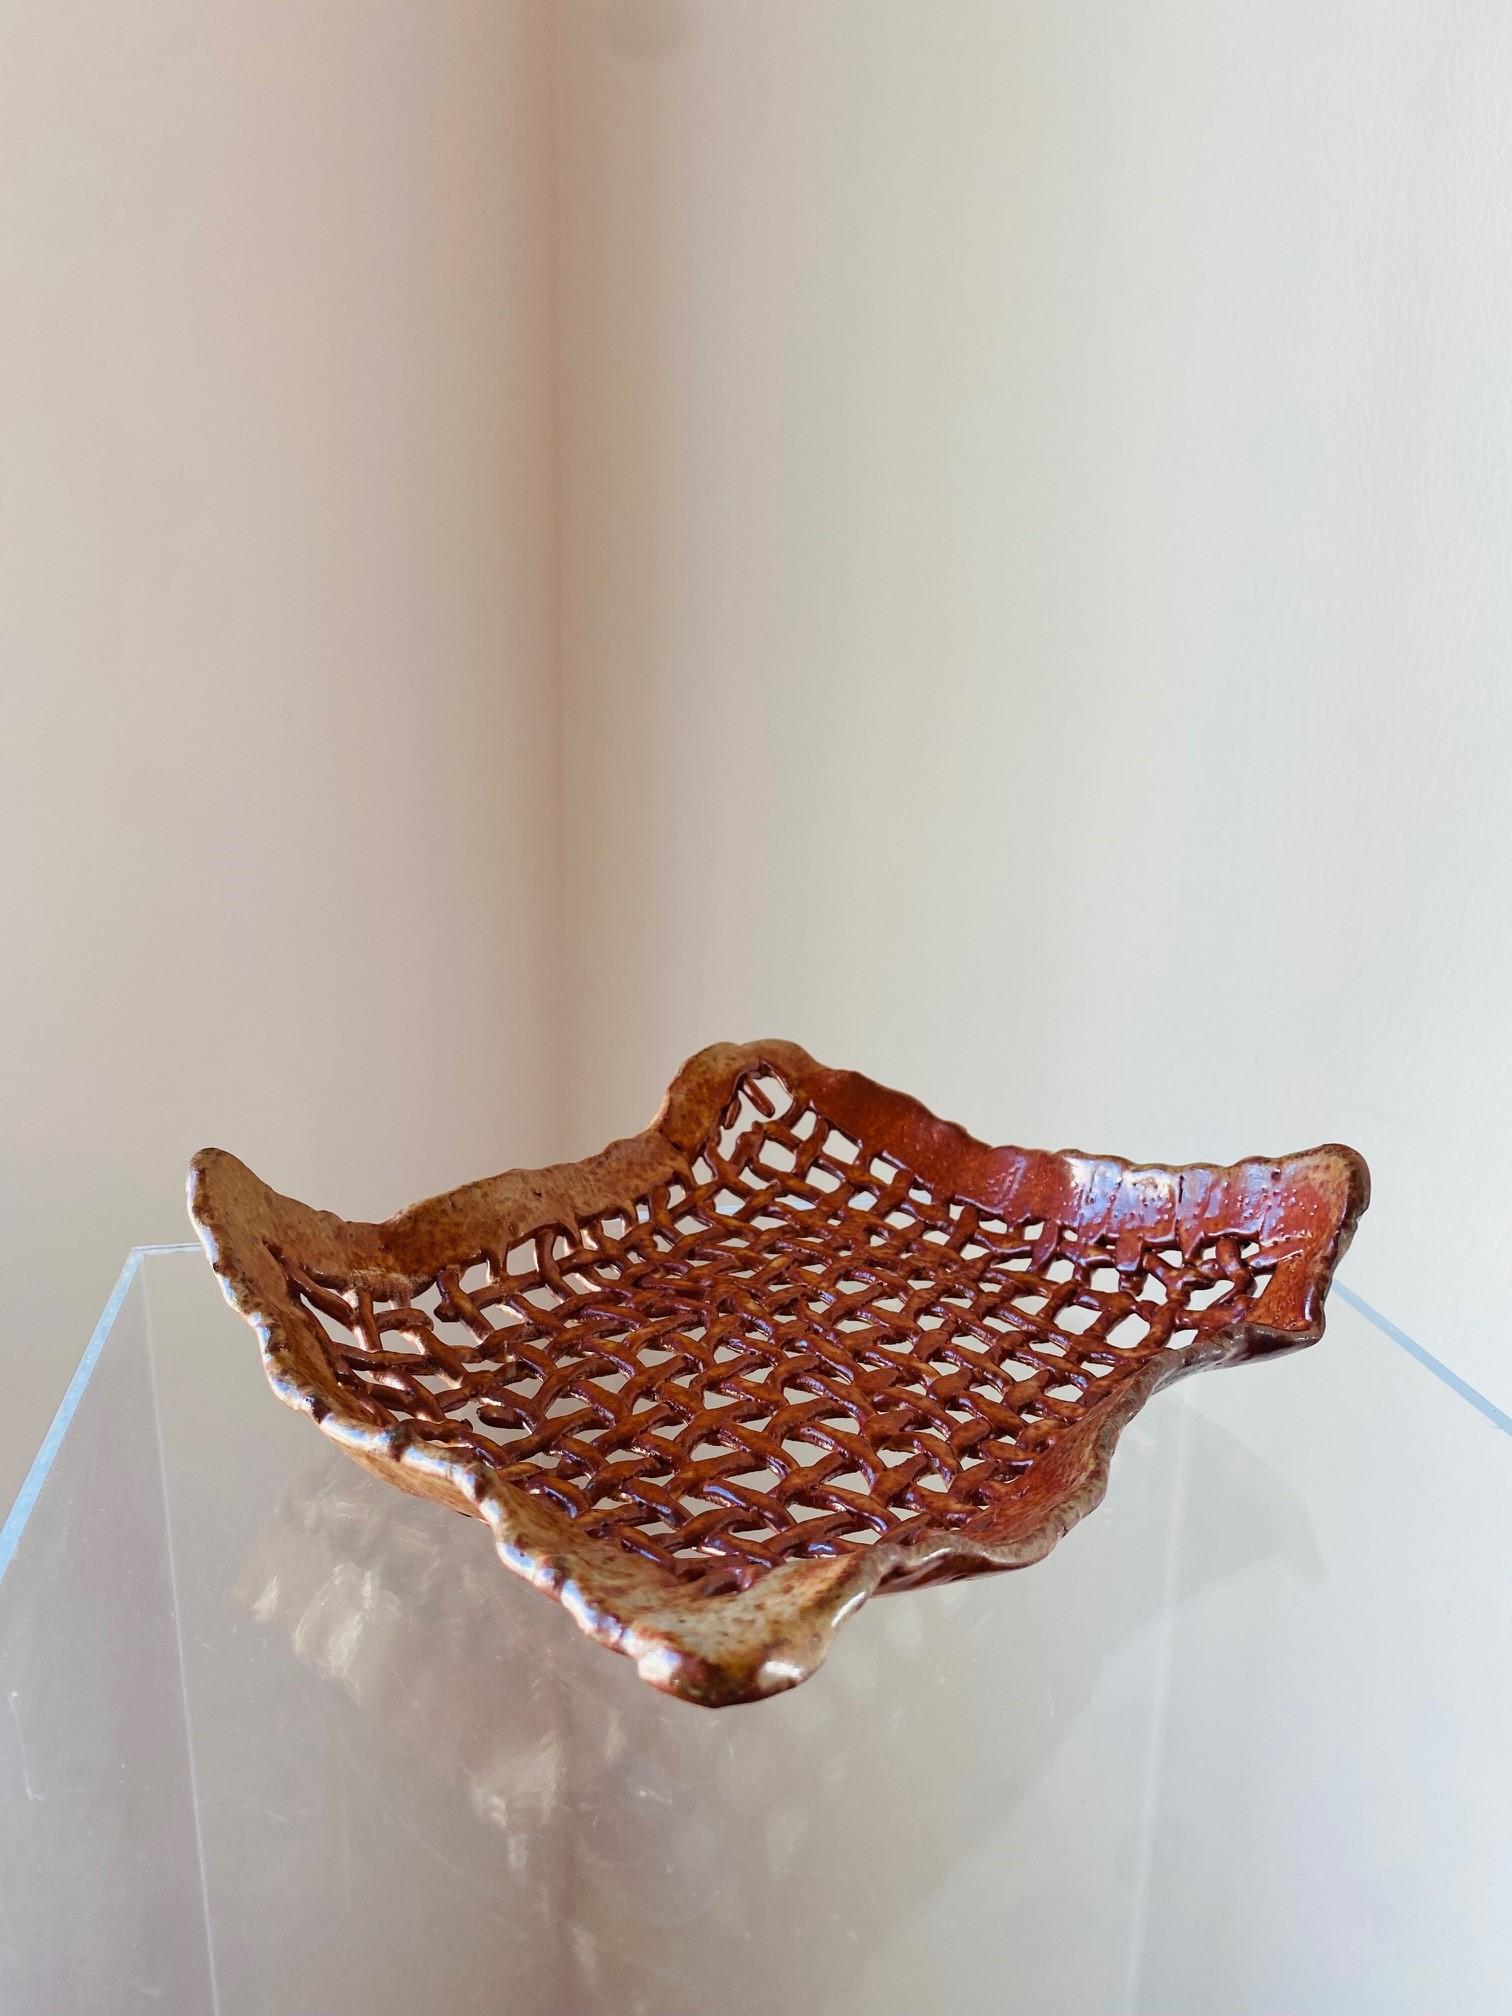 Incredibly beautiful finished ceramic art piece.  This vintage mid-century piece is unique as it is interesting.  Crafted with artistry to resemble a woven finished piece, this beautiful work of art mimics the texture and grain of real woven fabric.